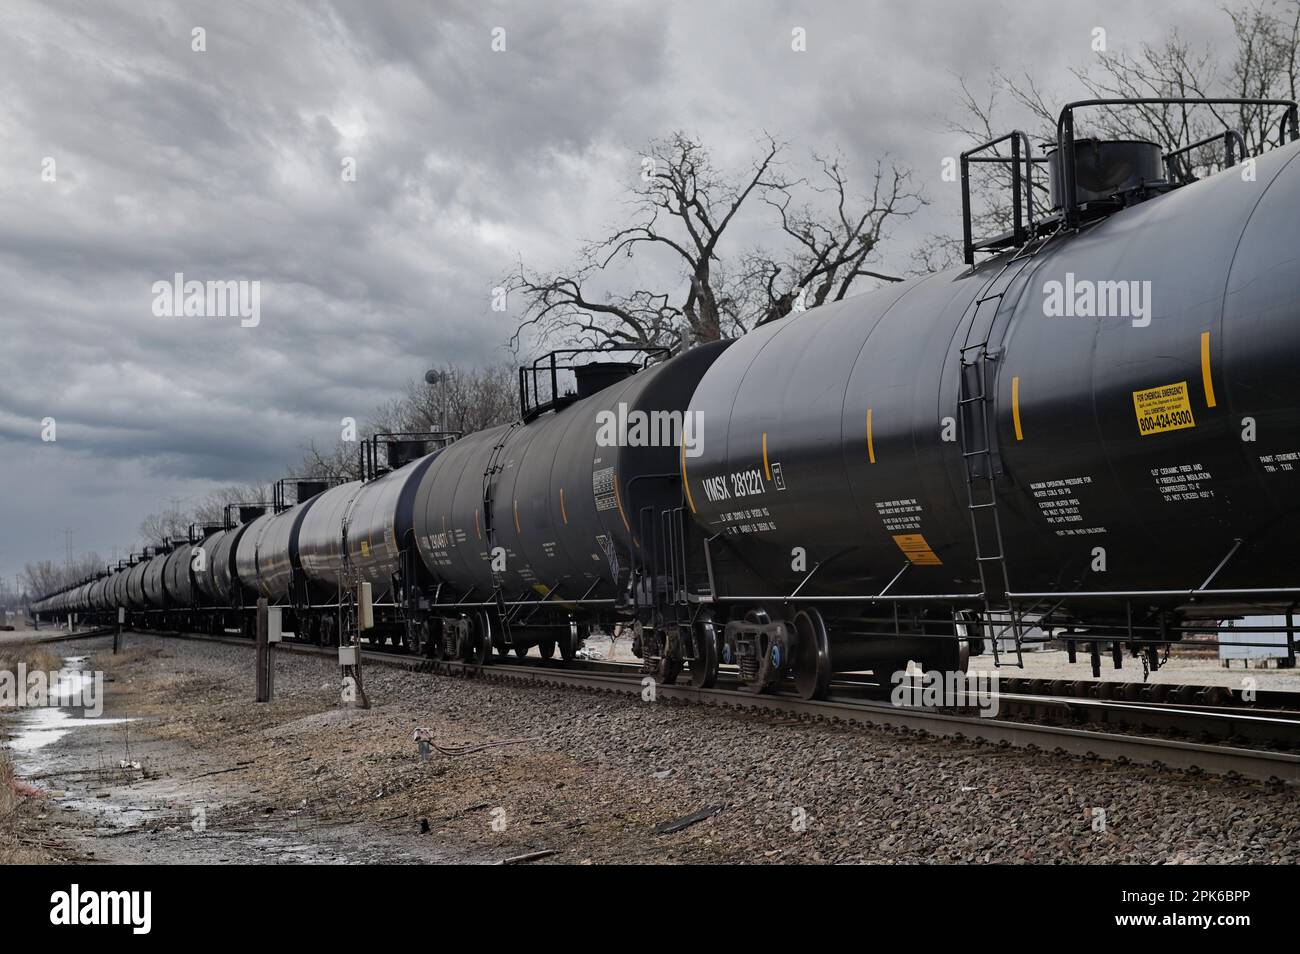 Elgin, Illinois, USA. A string of tank cars in a freight train passing through a northeastern Illinois. Stock Photo